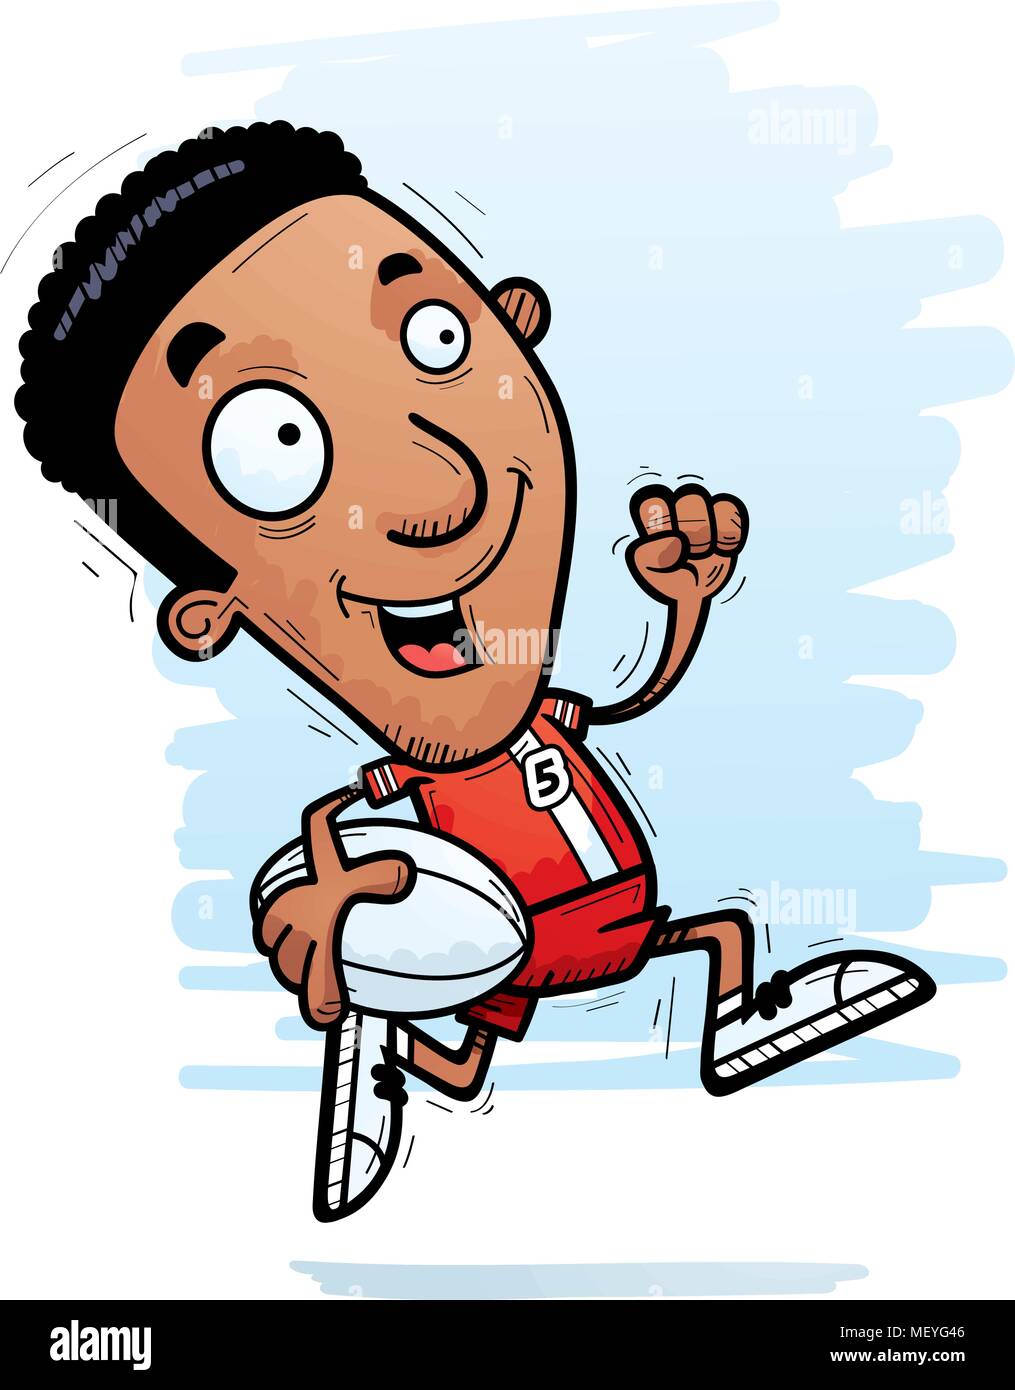 A cartoon illustration of a black man rugby player running. Stock Vector